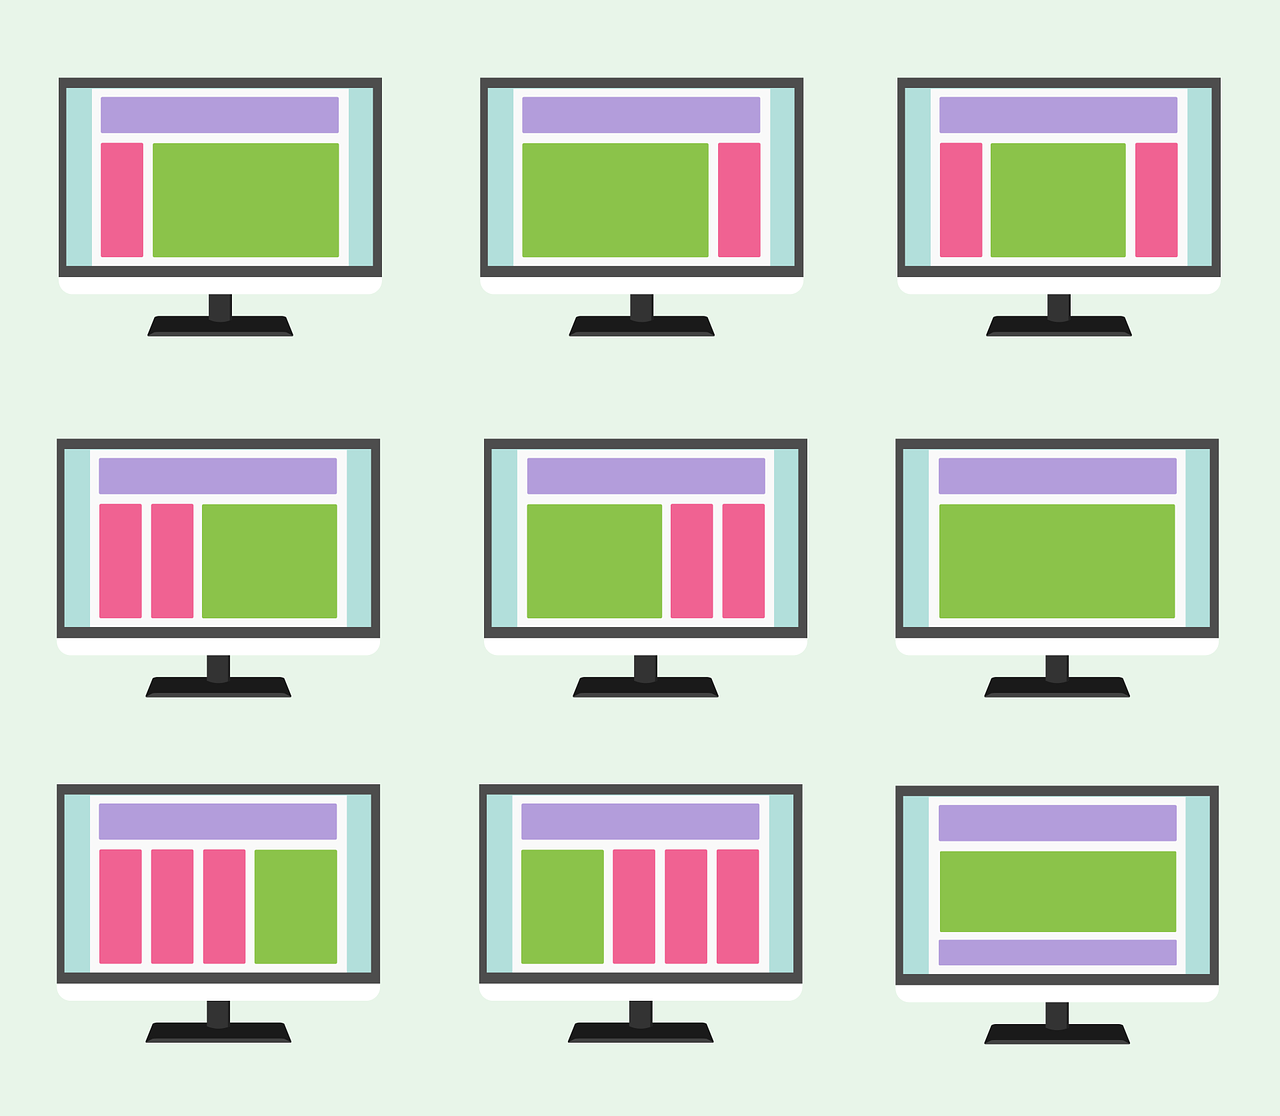 Graphic of different web page layouts.